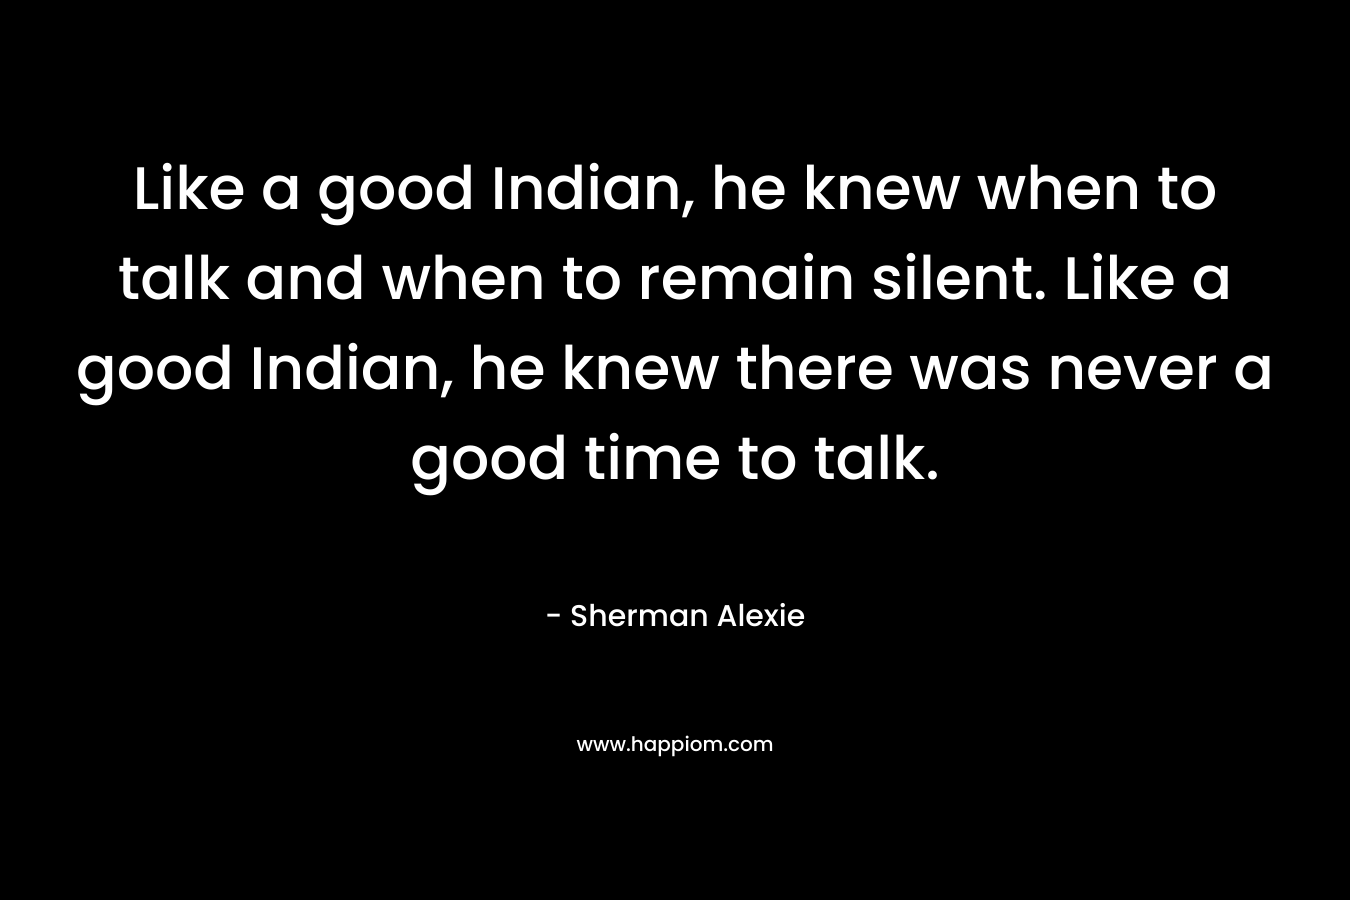 Like a good Indian, he knew when to talk and when to remain silent. Like a good Indian, he knew there was never a good time to talk. – Sherman Alexie